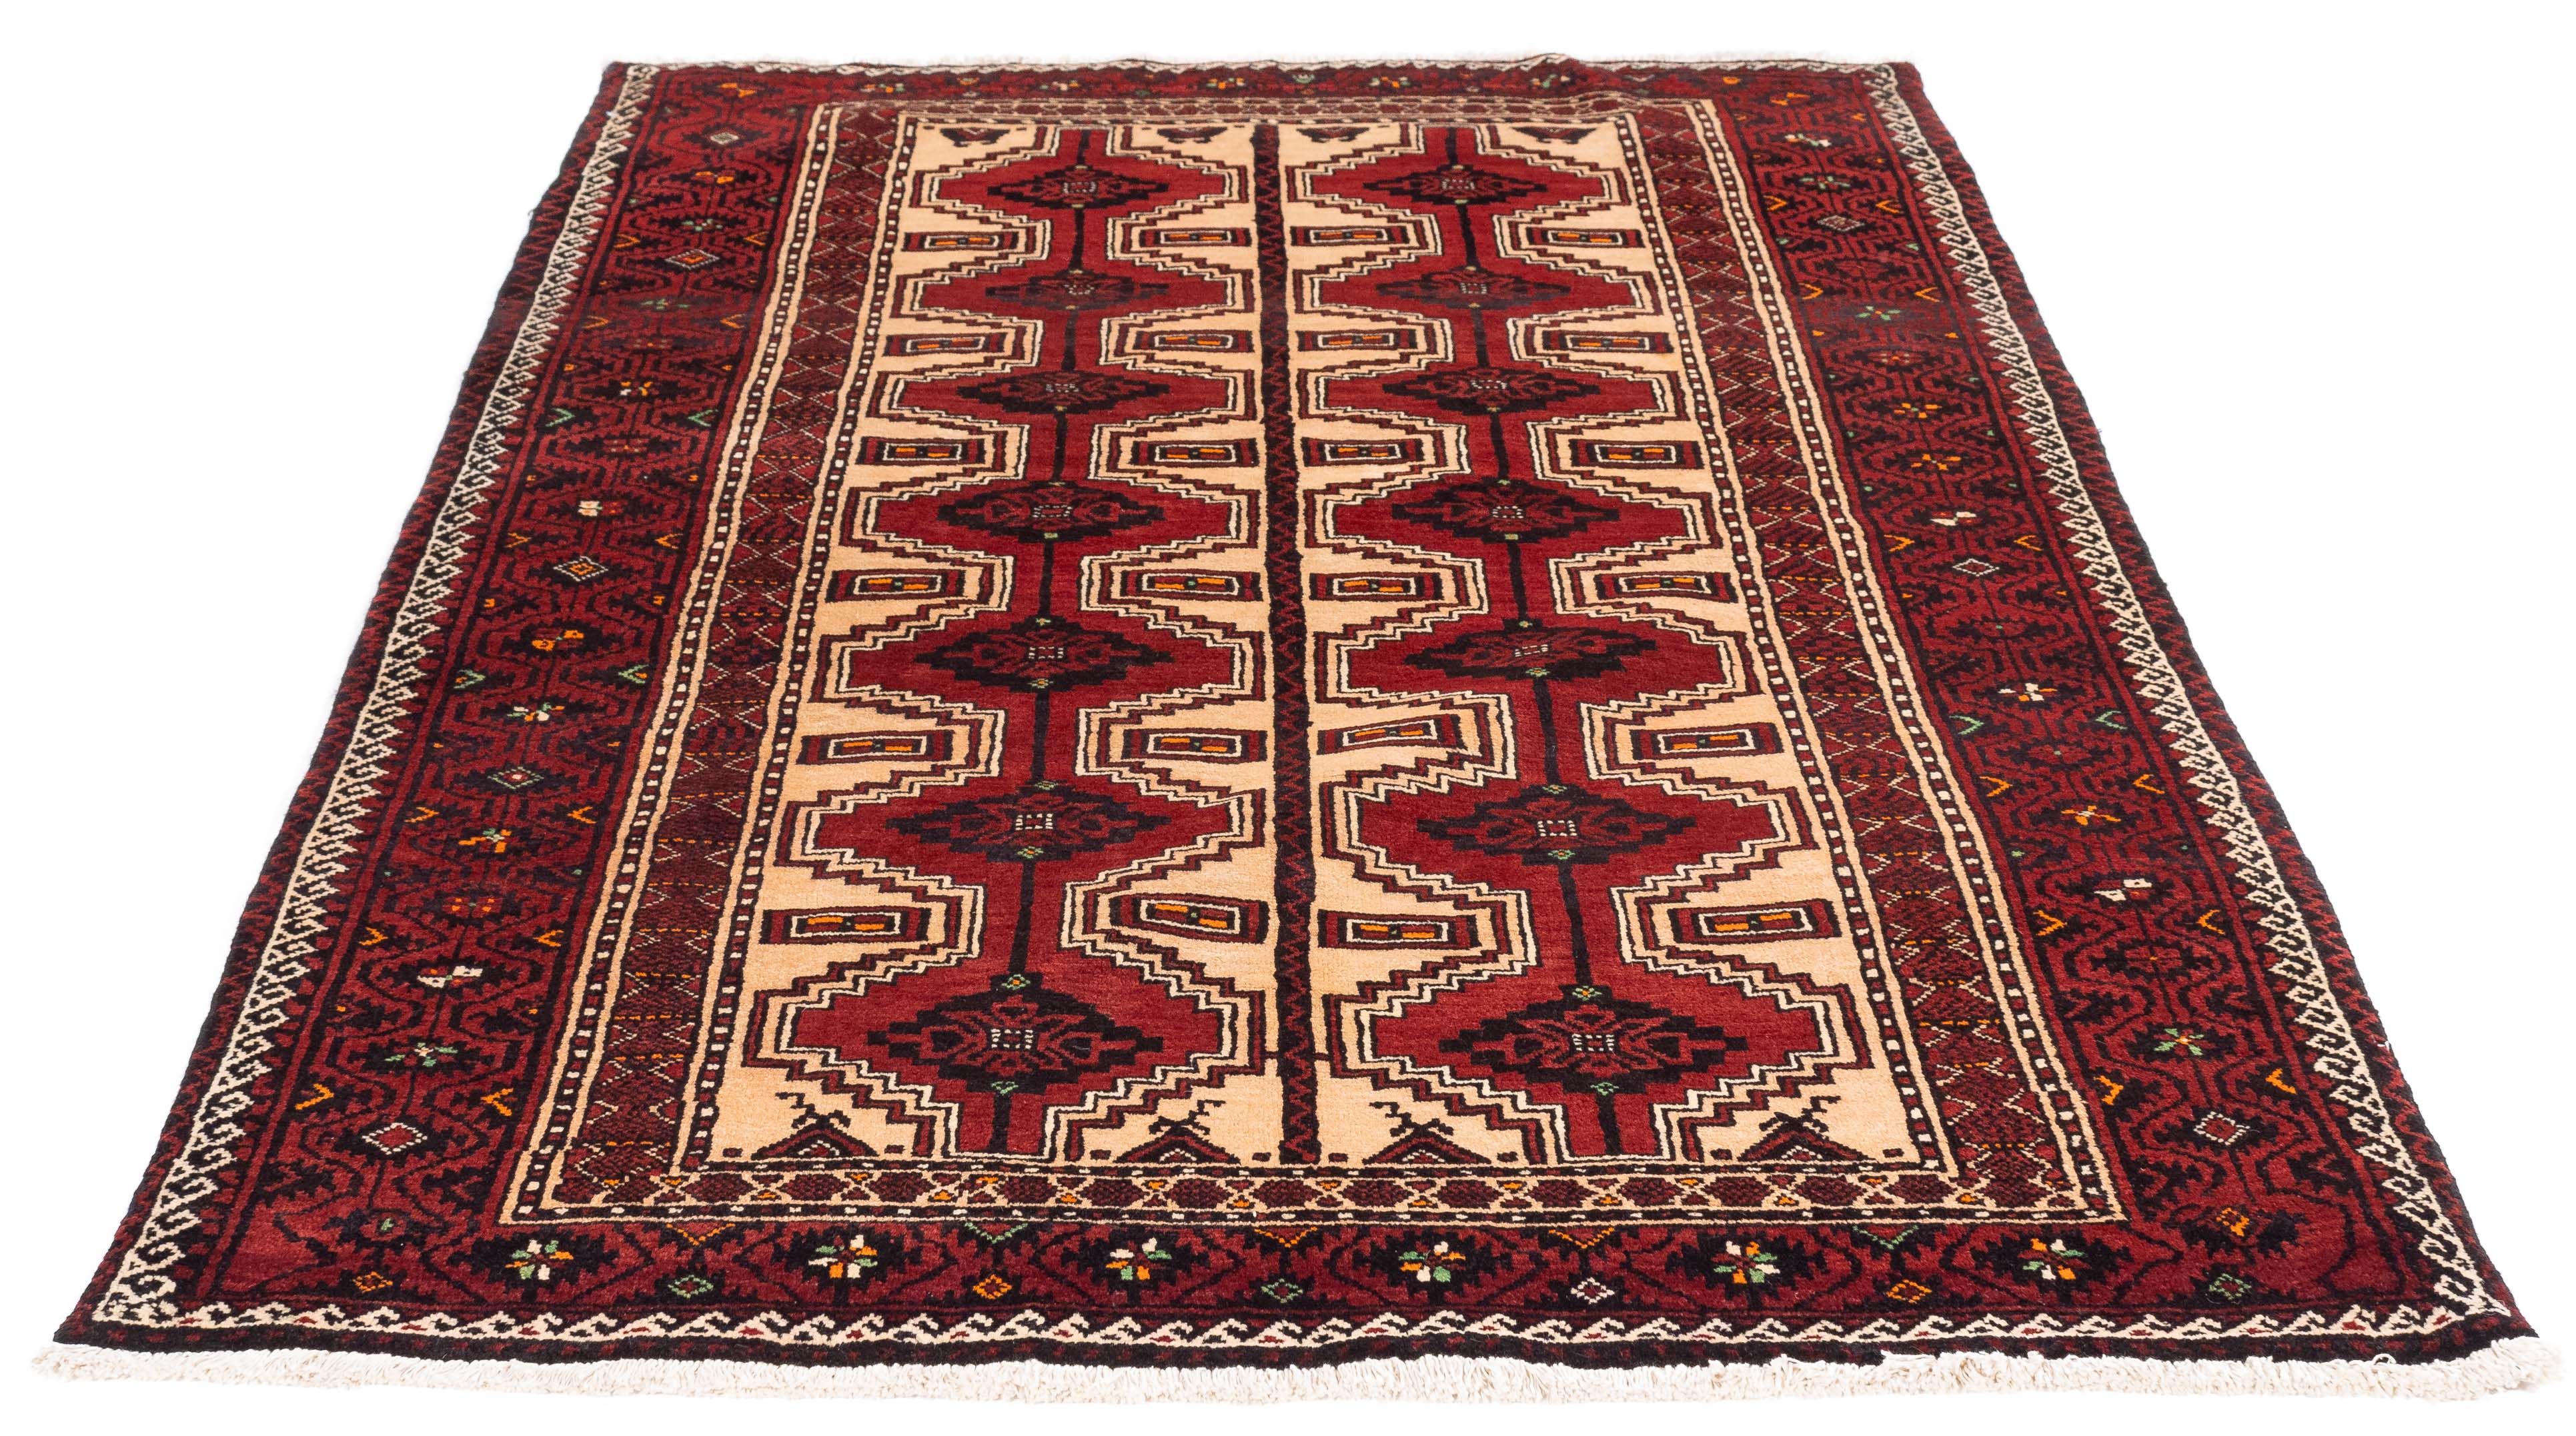 Authentic Handwoven Persian Balouch Rug <br> 4'5 x 7'3